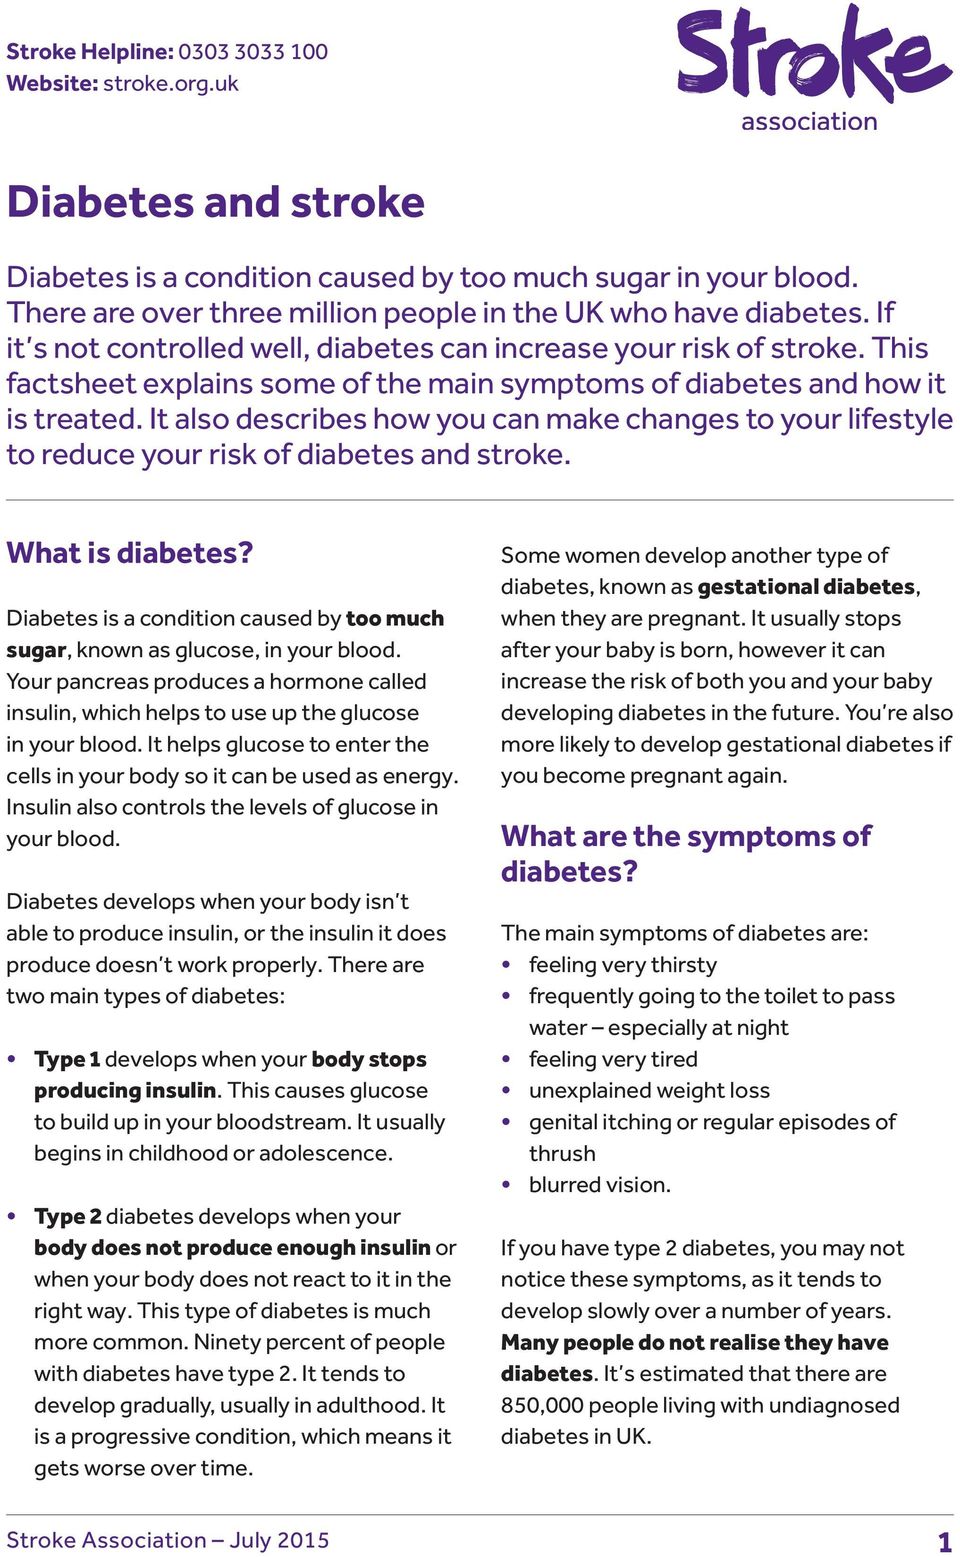 This factsheet explains some of the main symptoms of diabetes and how it is treated. It also describes how you can make changes to your lifestyle to reduce your risk of diabetes and stroke.